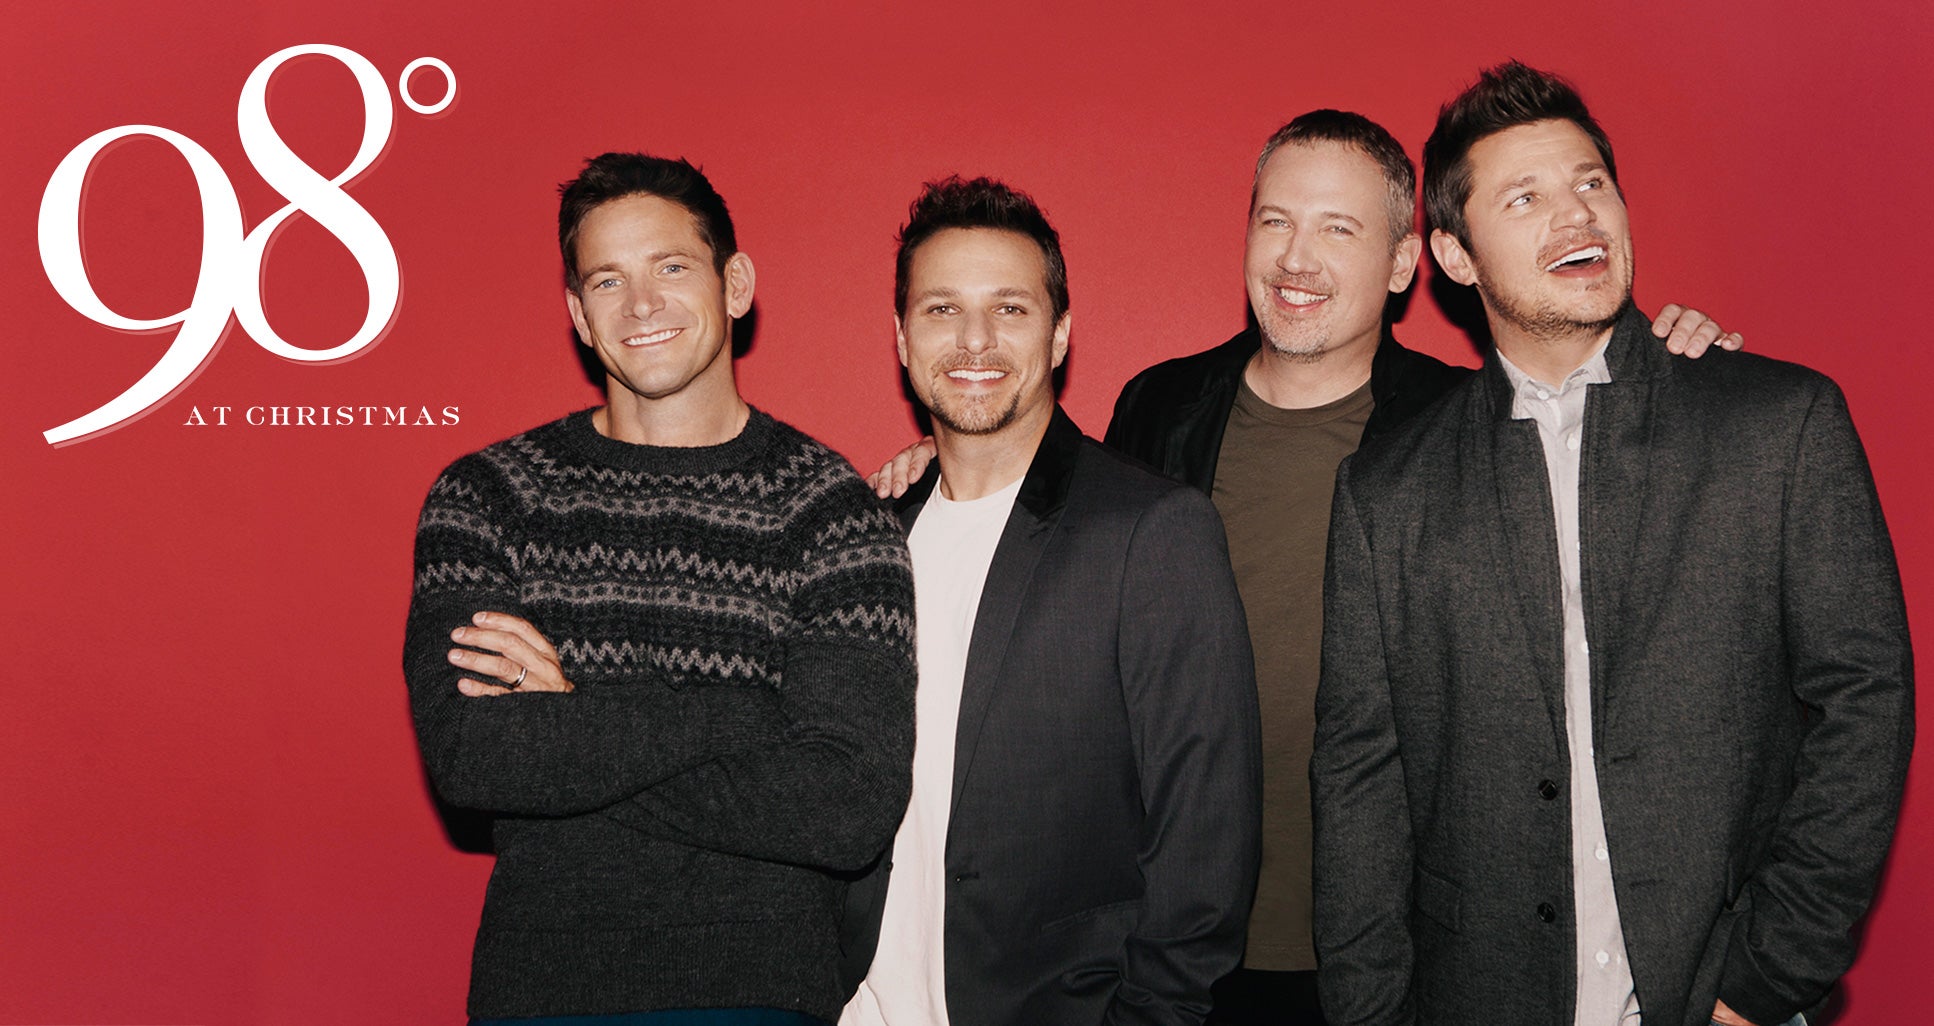 98 Degrees at Christmas, Dominion Energy Center